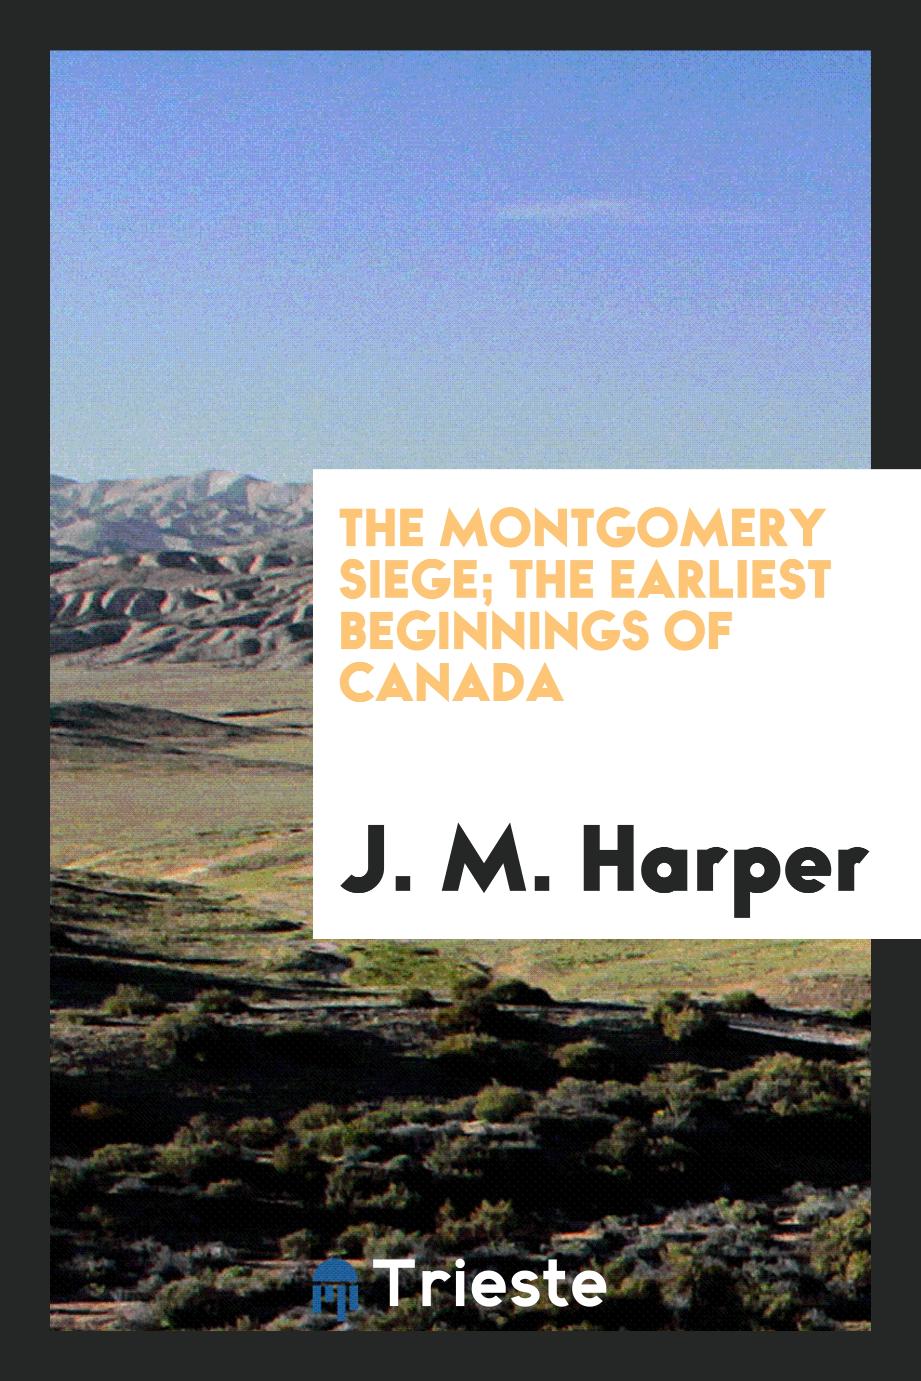 The Montgomery siege; The earliest beginnings of Canada